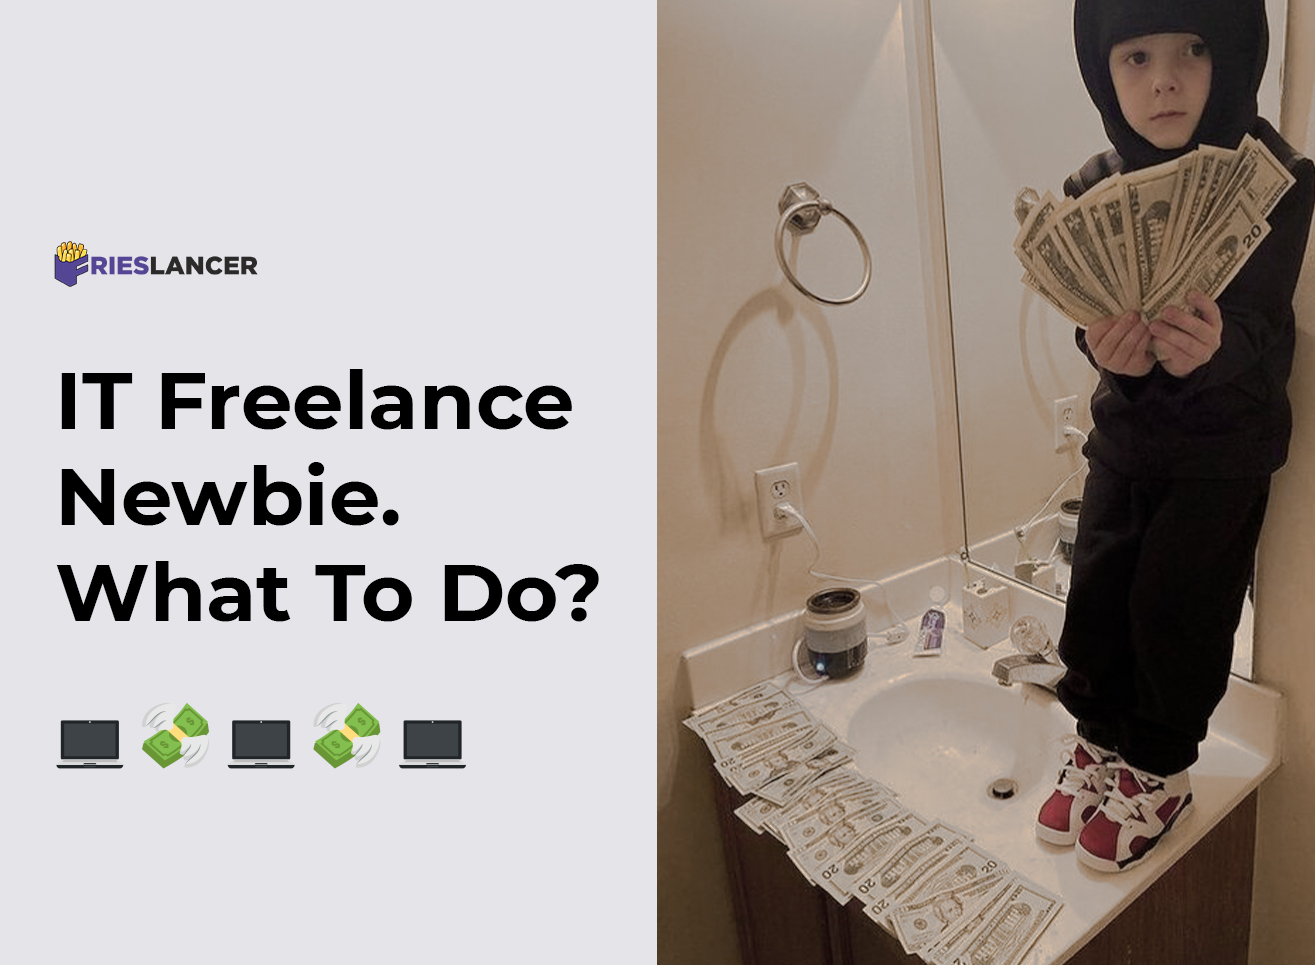 A Guide To Action For Freelance Newbies In IT.